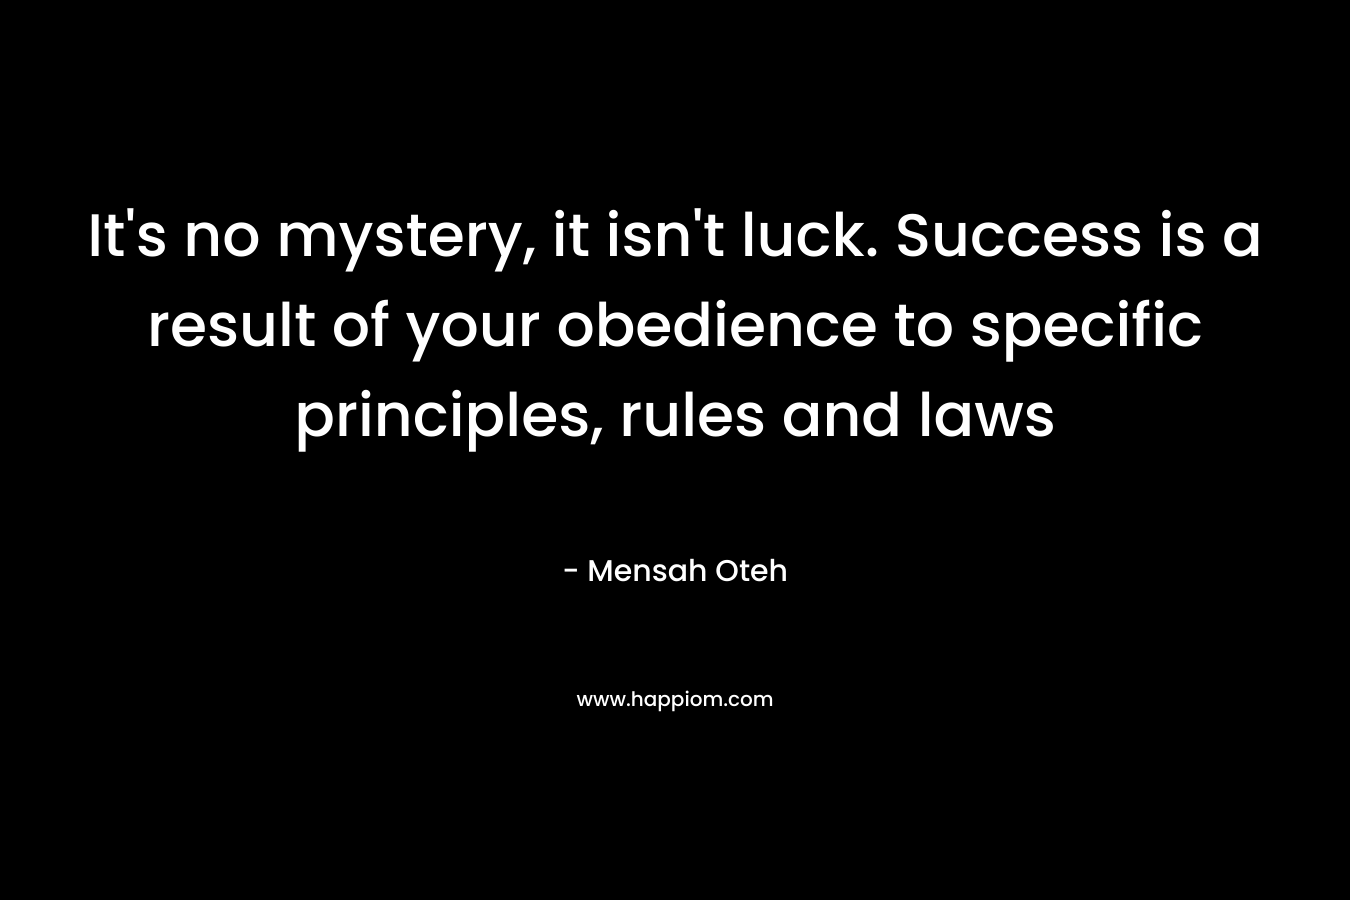 It's no mystery, it isn't luck. Success is a result of your obedience to specific principles, rules and laws